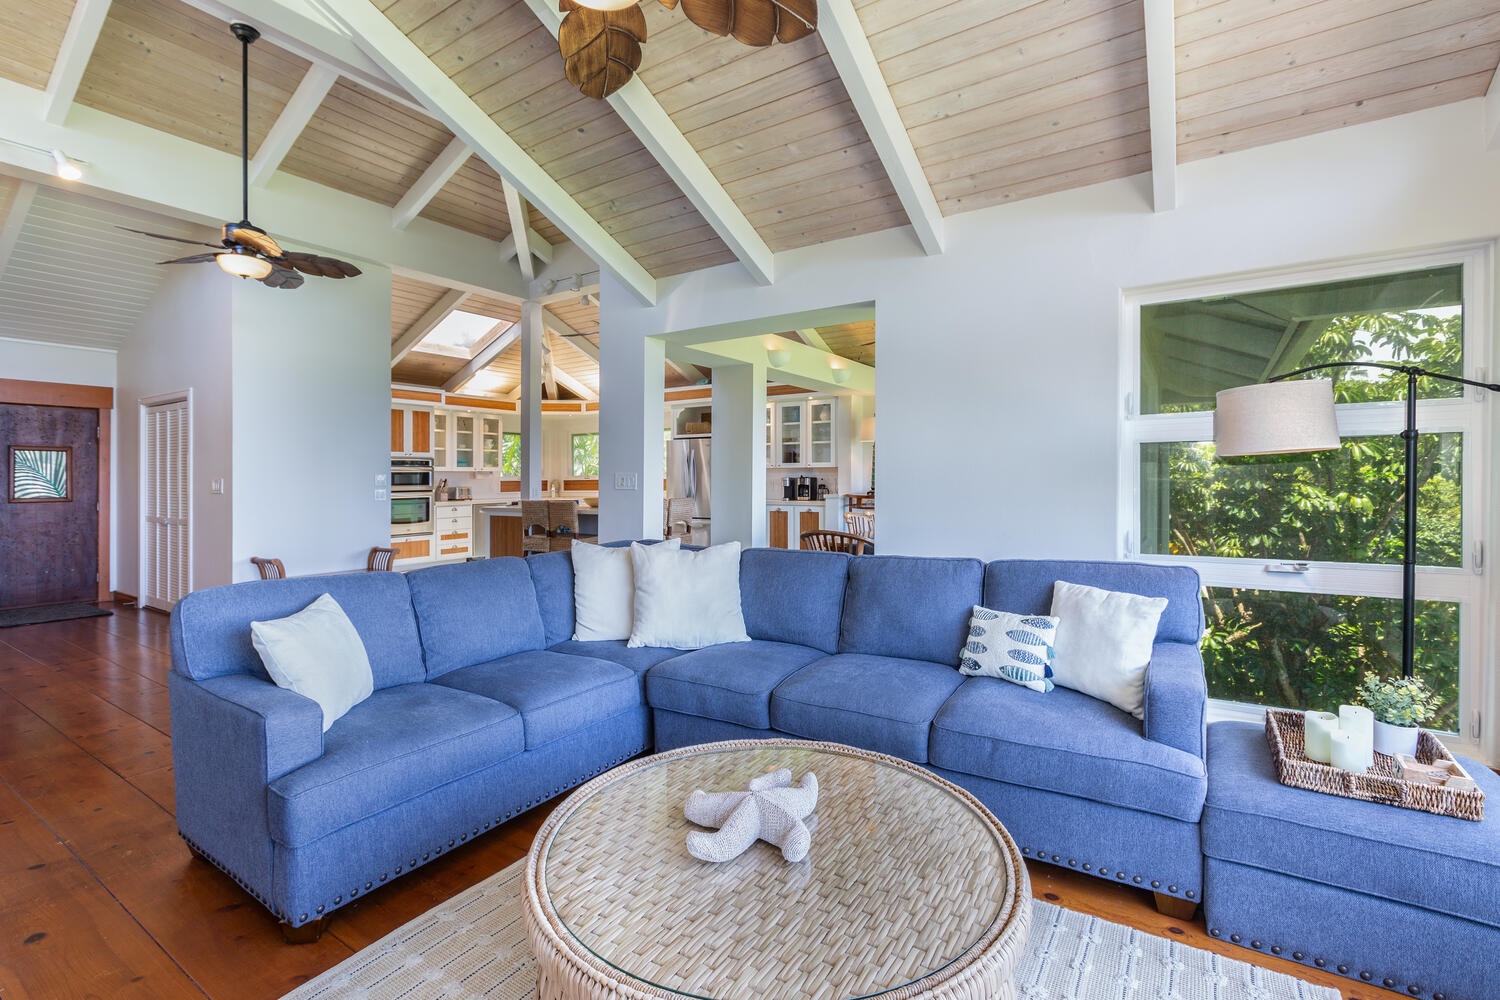 Princeville Vacation Rentals, Wai Lani - The vaulted ceilings and beams, combined with the abundance of natural light, create an open and airy ambiance.